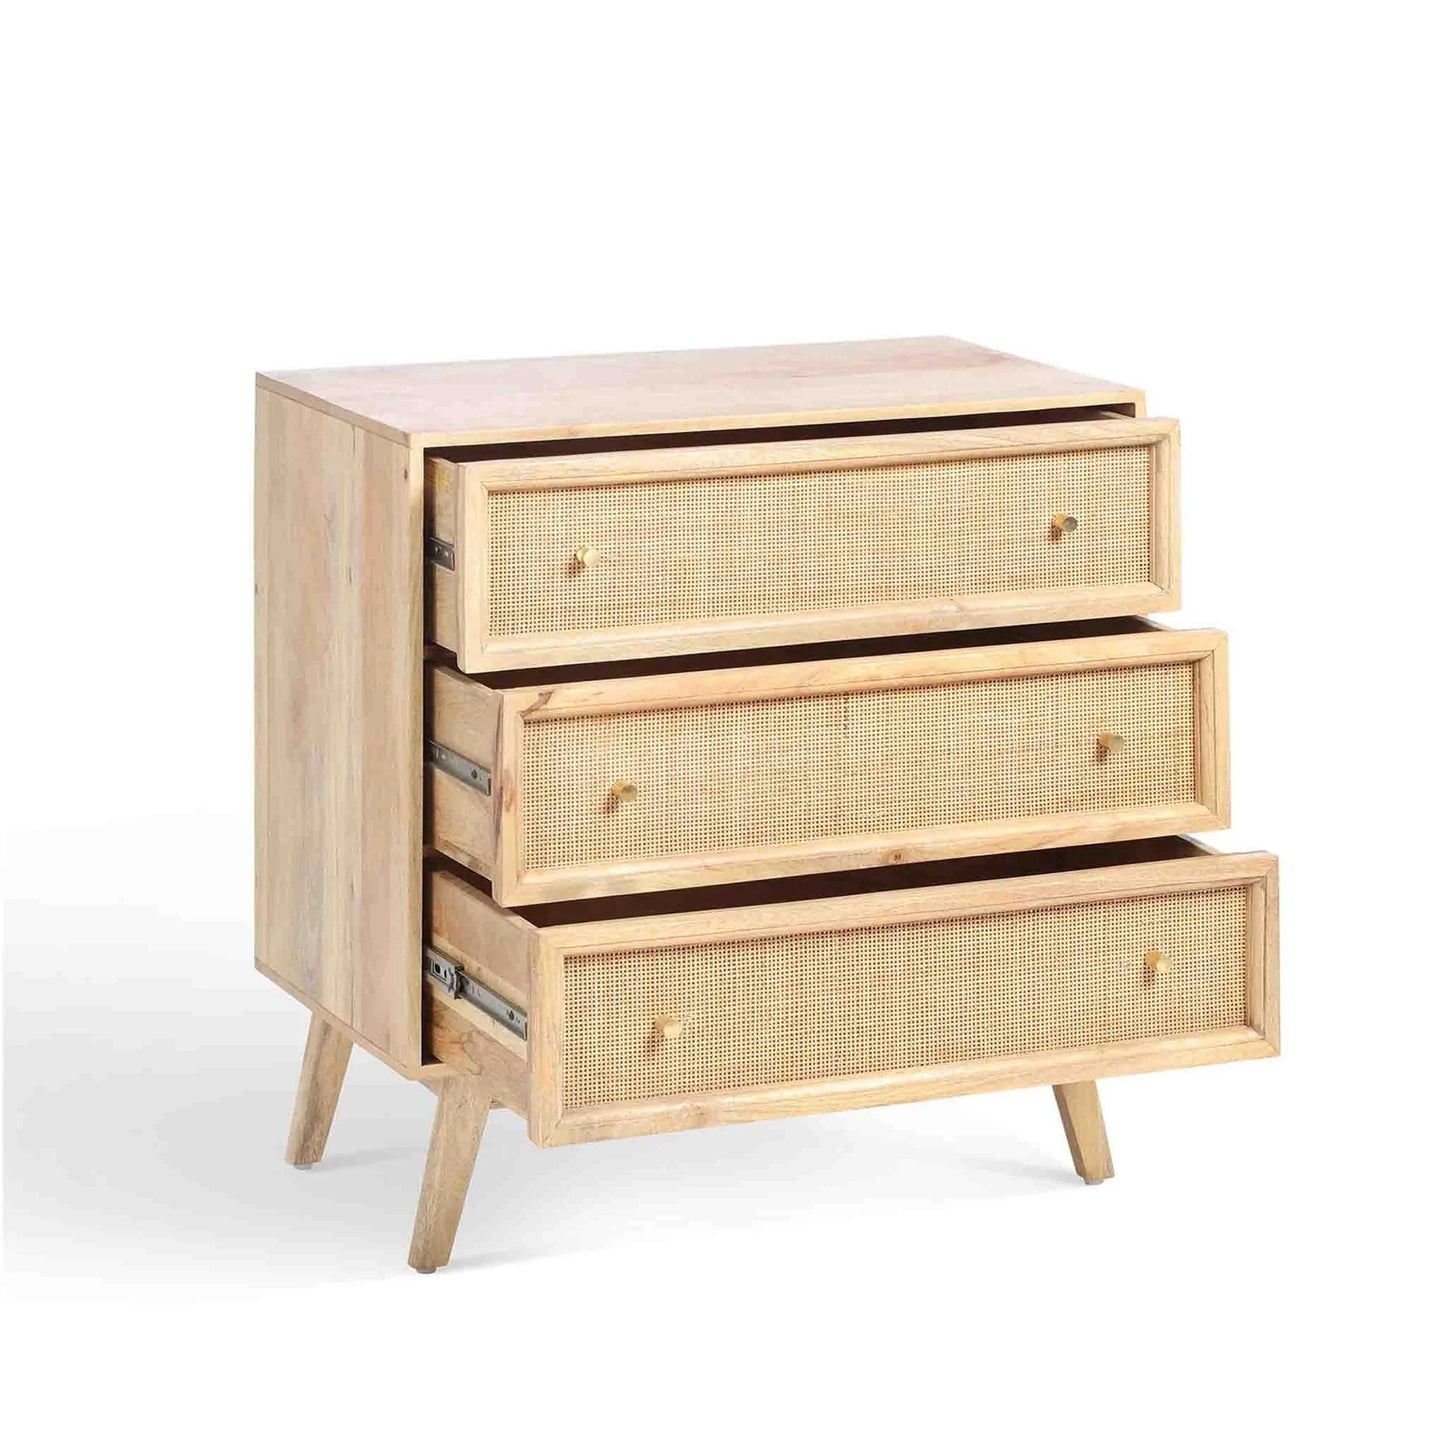 26% off, SP0302L, Raphia Chest Of Drawers, 3 Drawers, Natur